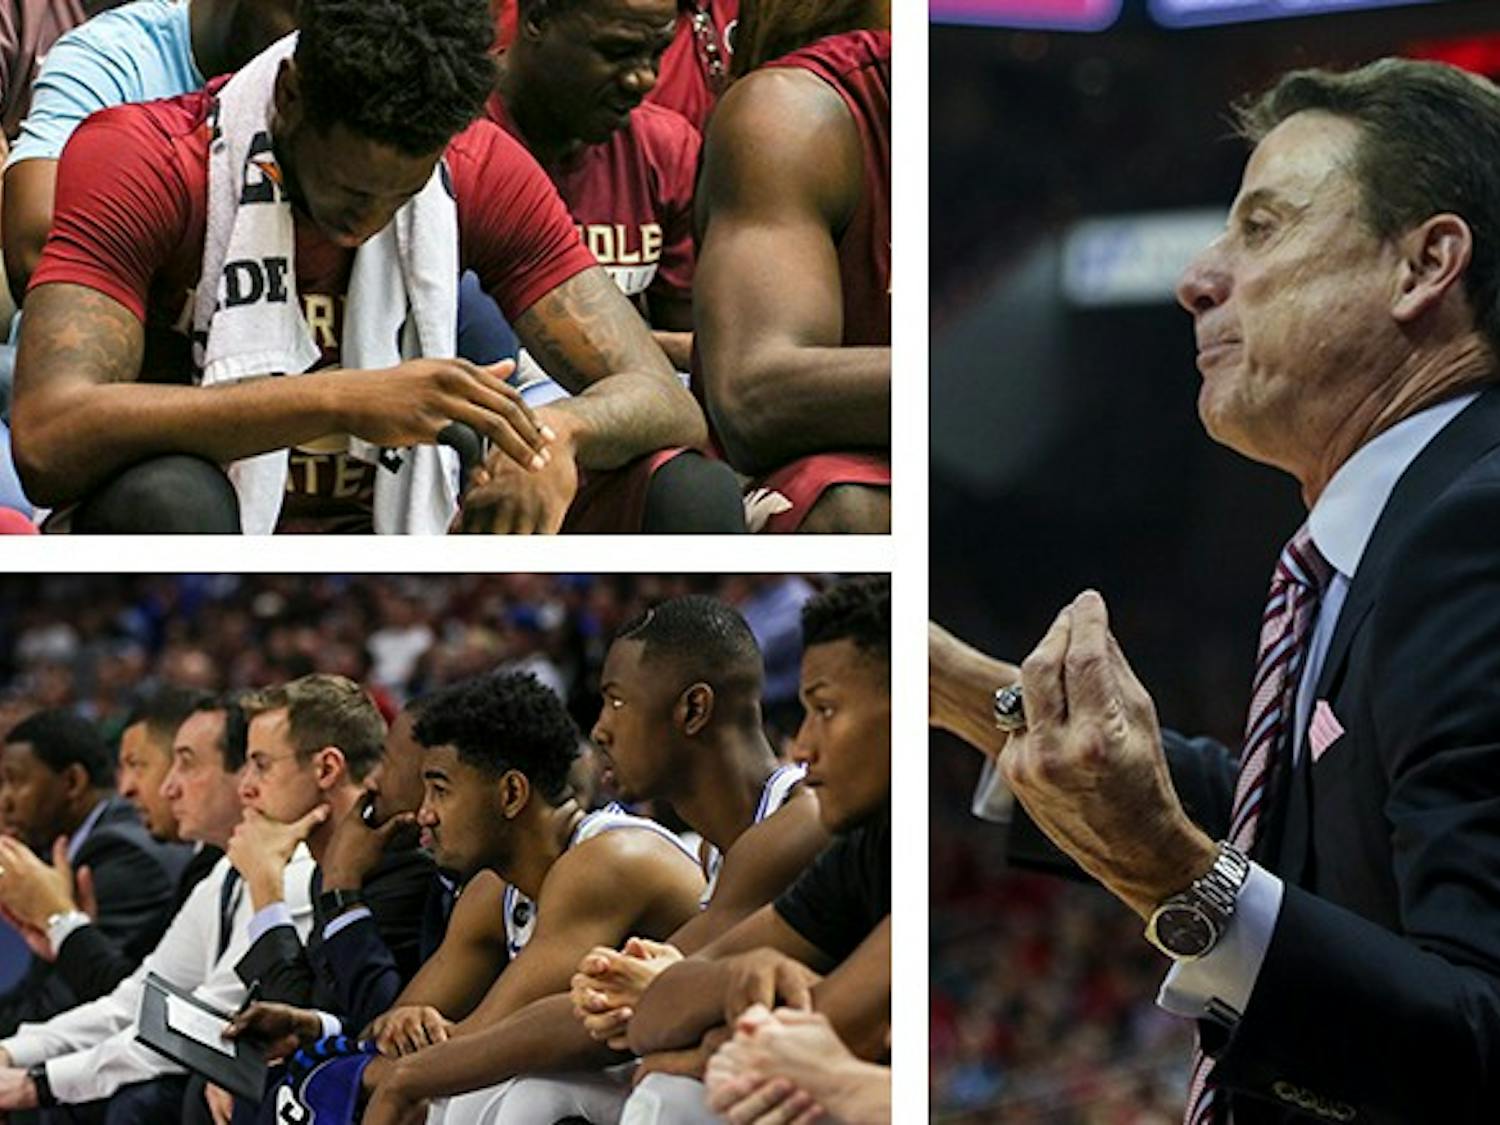 Three of the ACC’s top teams were knocked out in the Round of 32 despite earning top-three seeds in the Big Dance.